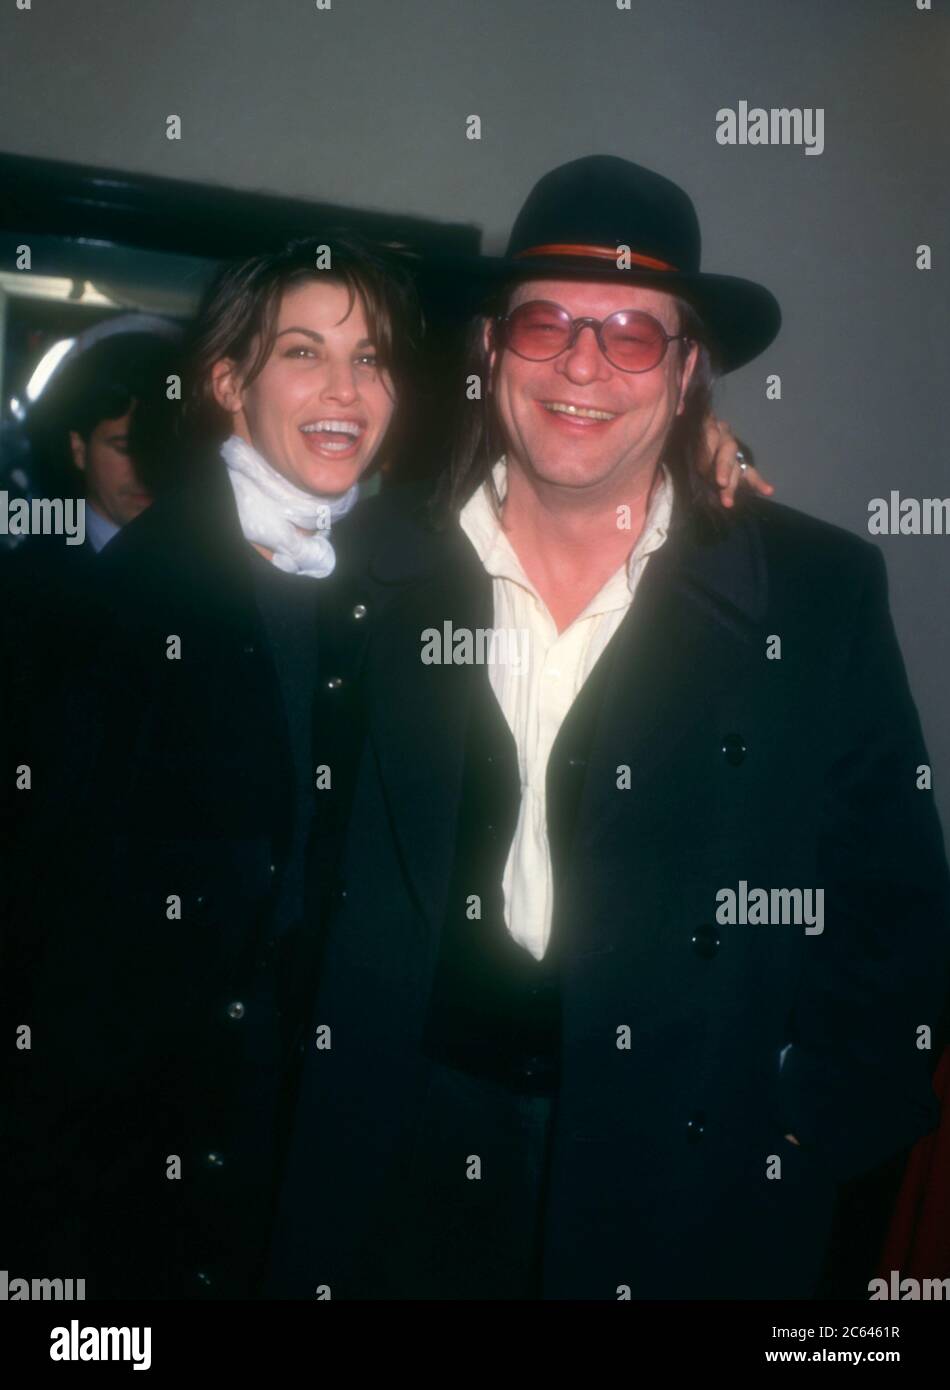 Westwood, California, USA 13th December 1995 Actress Gina Gershon and director Terry Gilliam attend Universal Pictures' '12 Monkeys' Premiere on December 13, 1995 at Mann Bruin Theatre in Westwood, California, USA. Photo by Barry King/Alamy Stock Photo Stock Photo